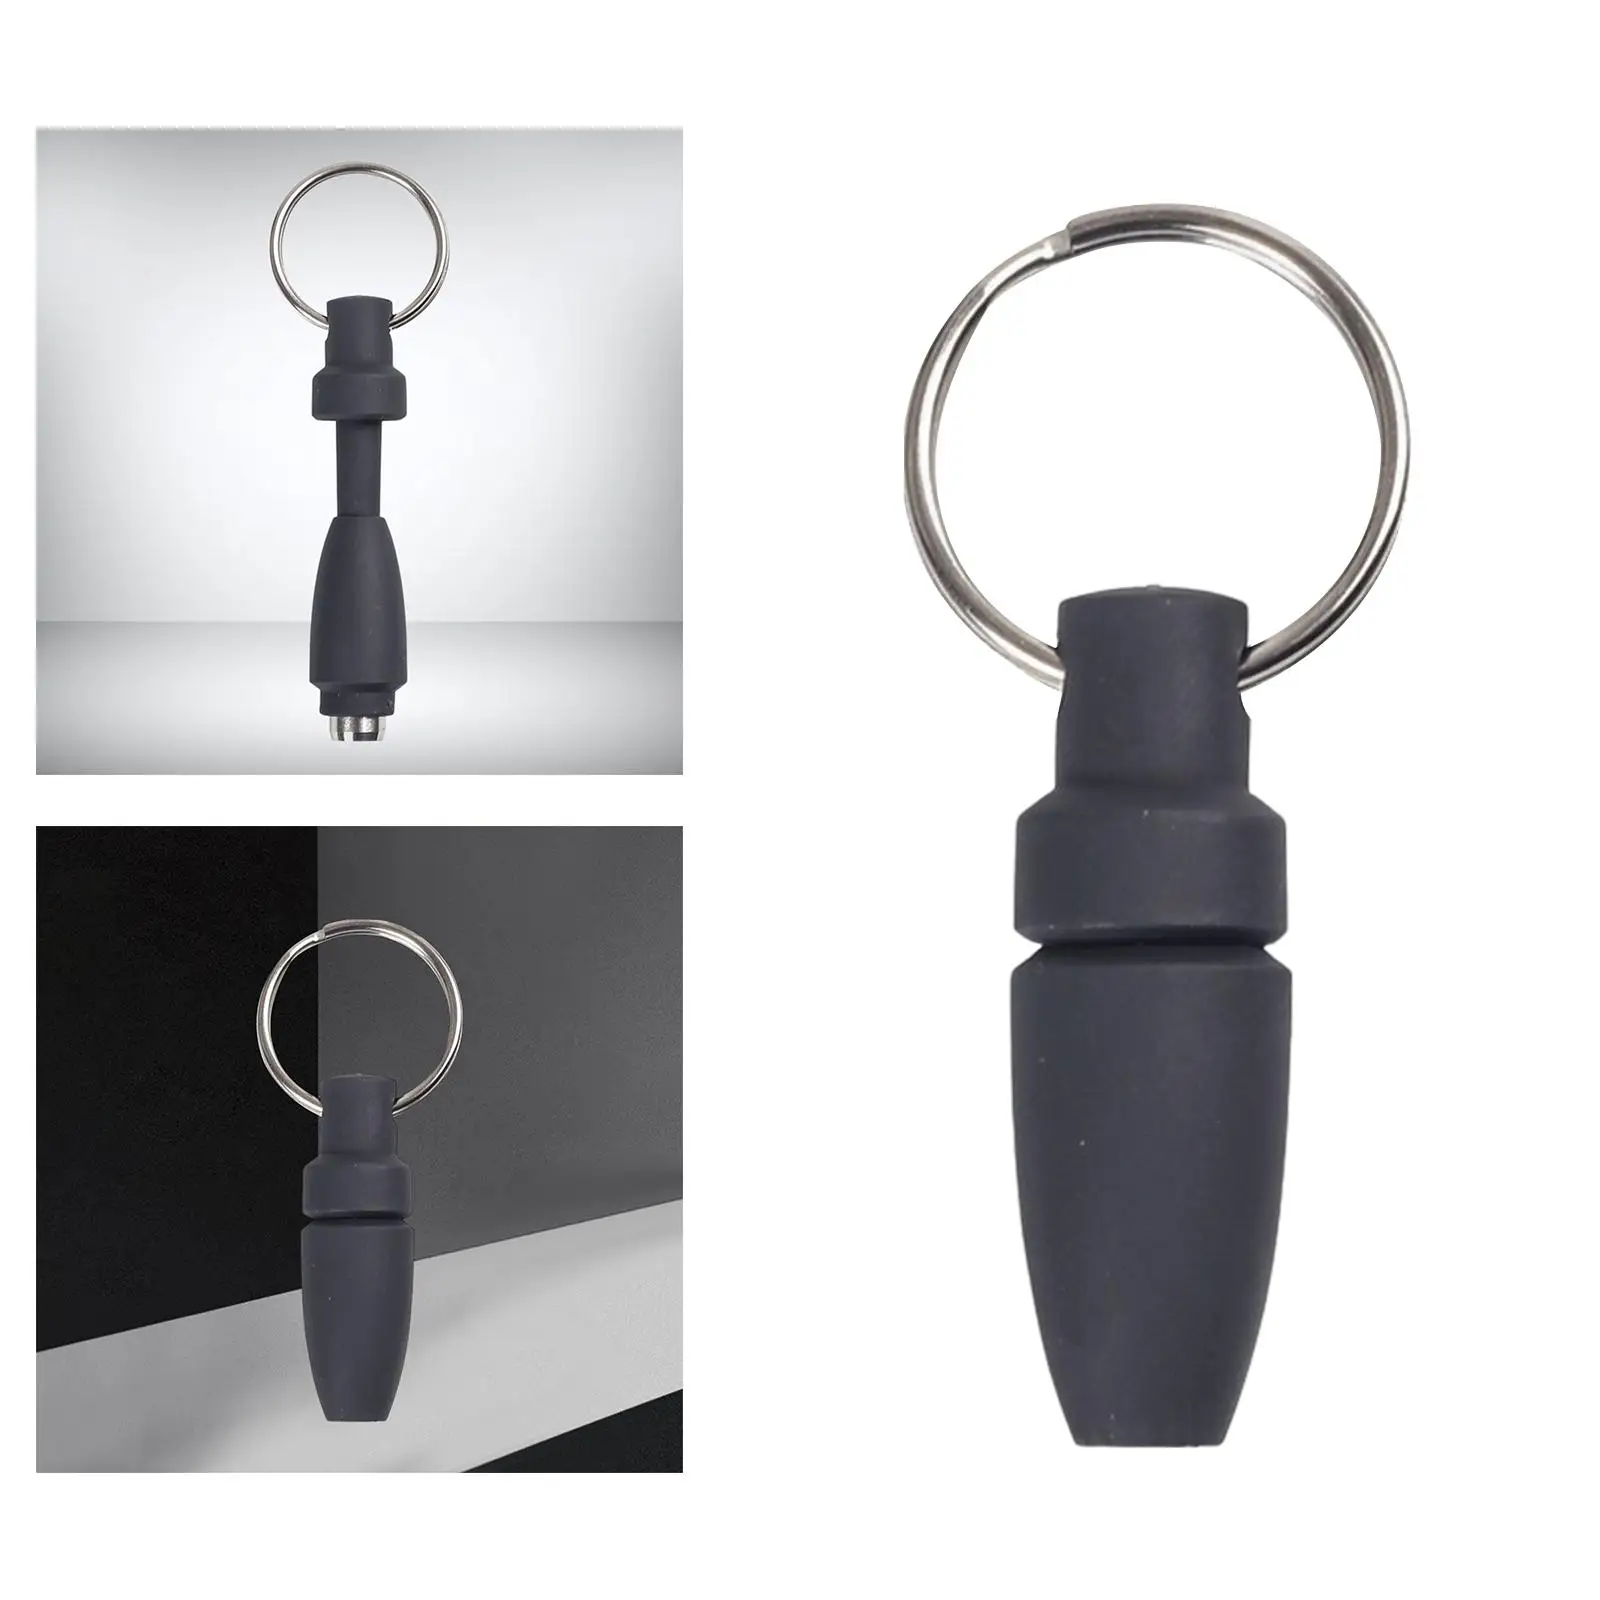  Punch Cutter Key Chain , Drill Made of Stainless Steel and Silicone, Sturdy and Durable, Comfortable to Hold